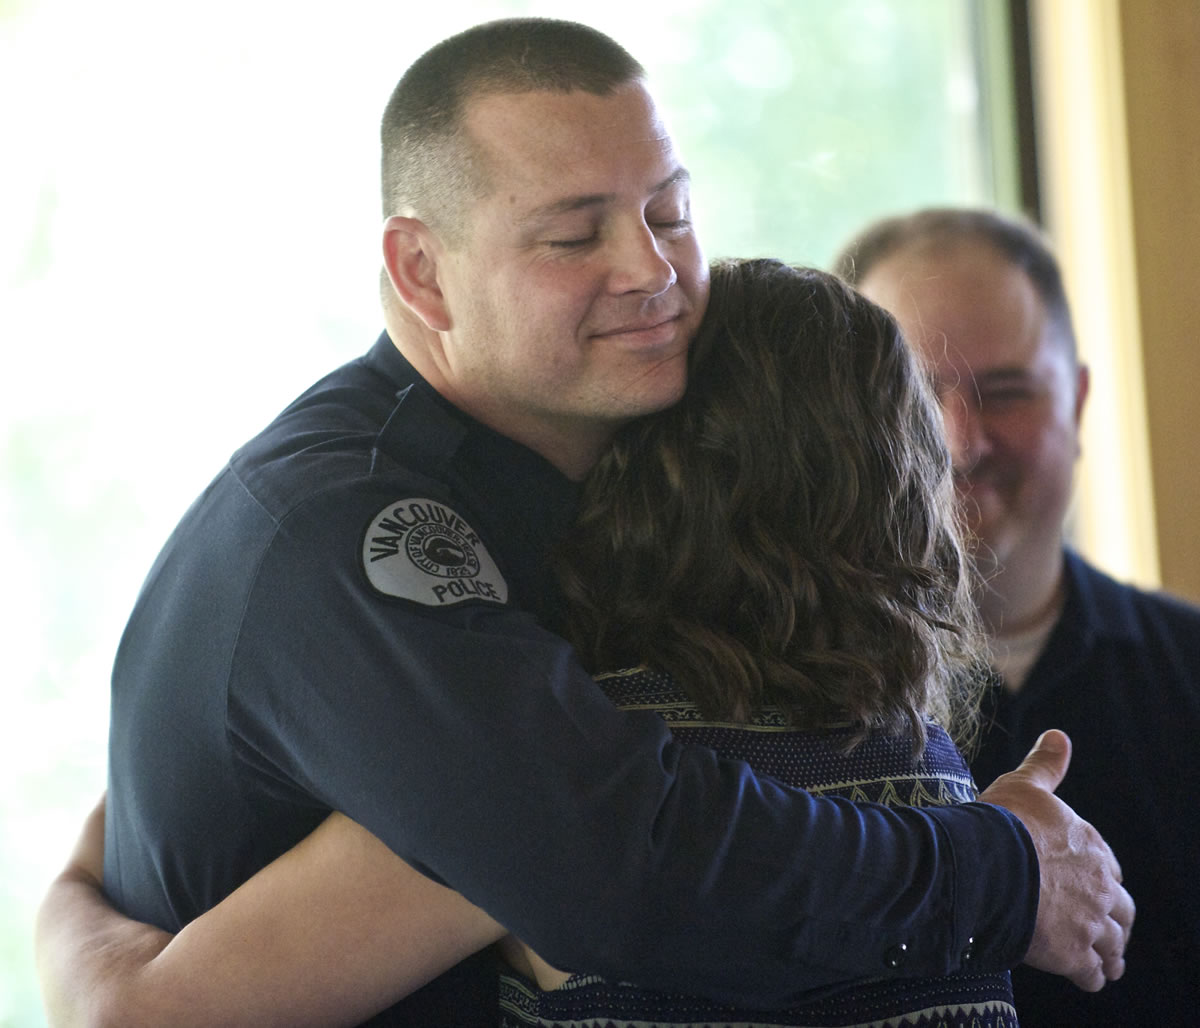 Vancouver police Officer Eric McCaleb gets a hug from Heidi Stewart, 18, after he received the Life Saving Award during a ceremony Thursday.